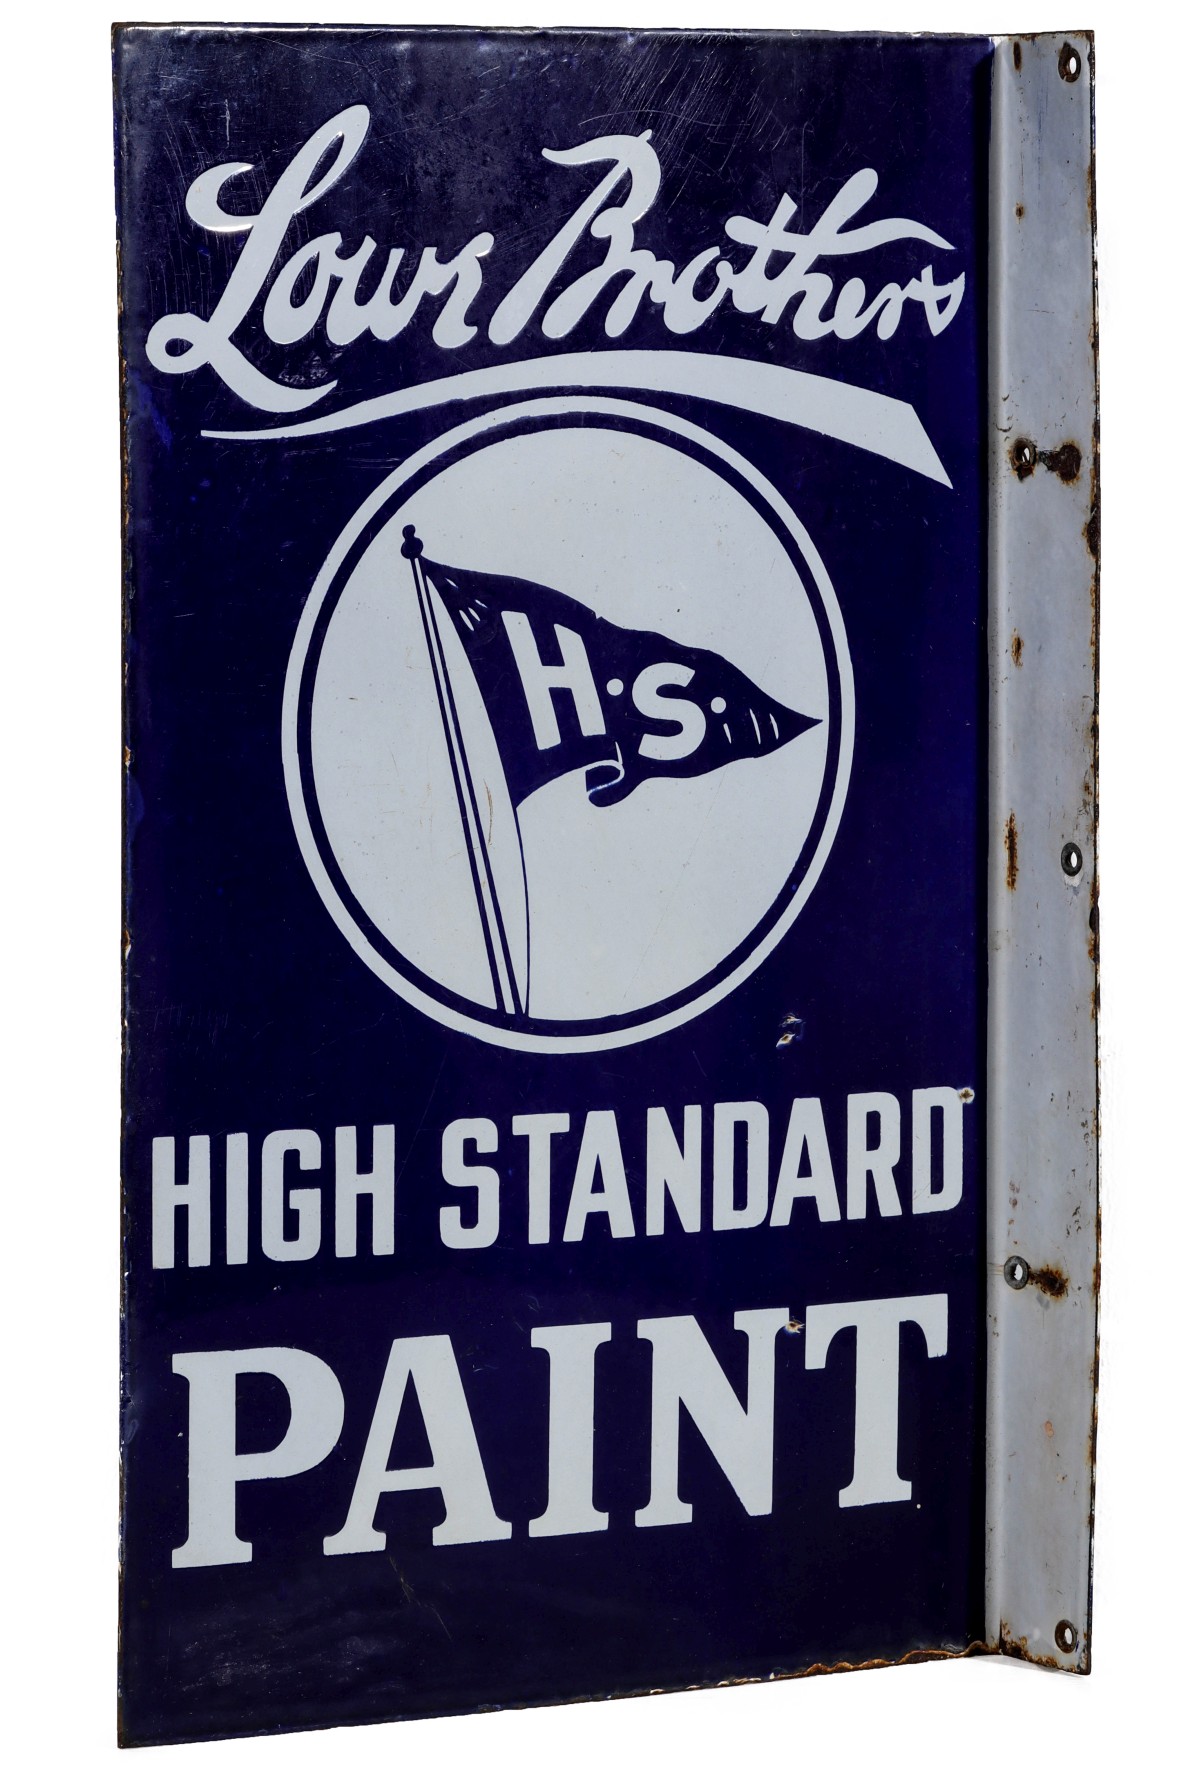 A LOWE BROTHERS PAINT PORCELAIN ENAMEL ADVERTISING SIGN